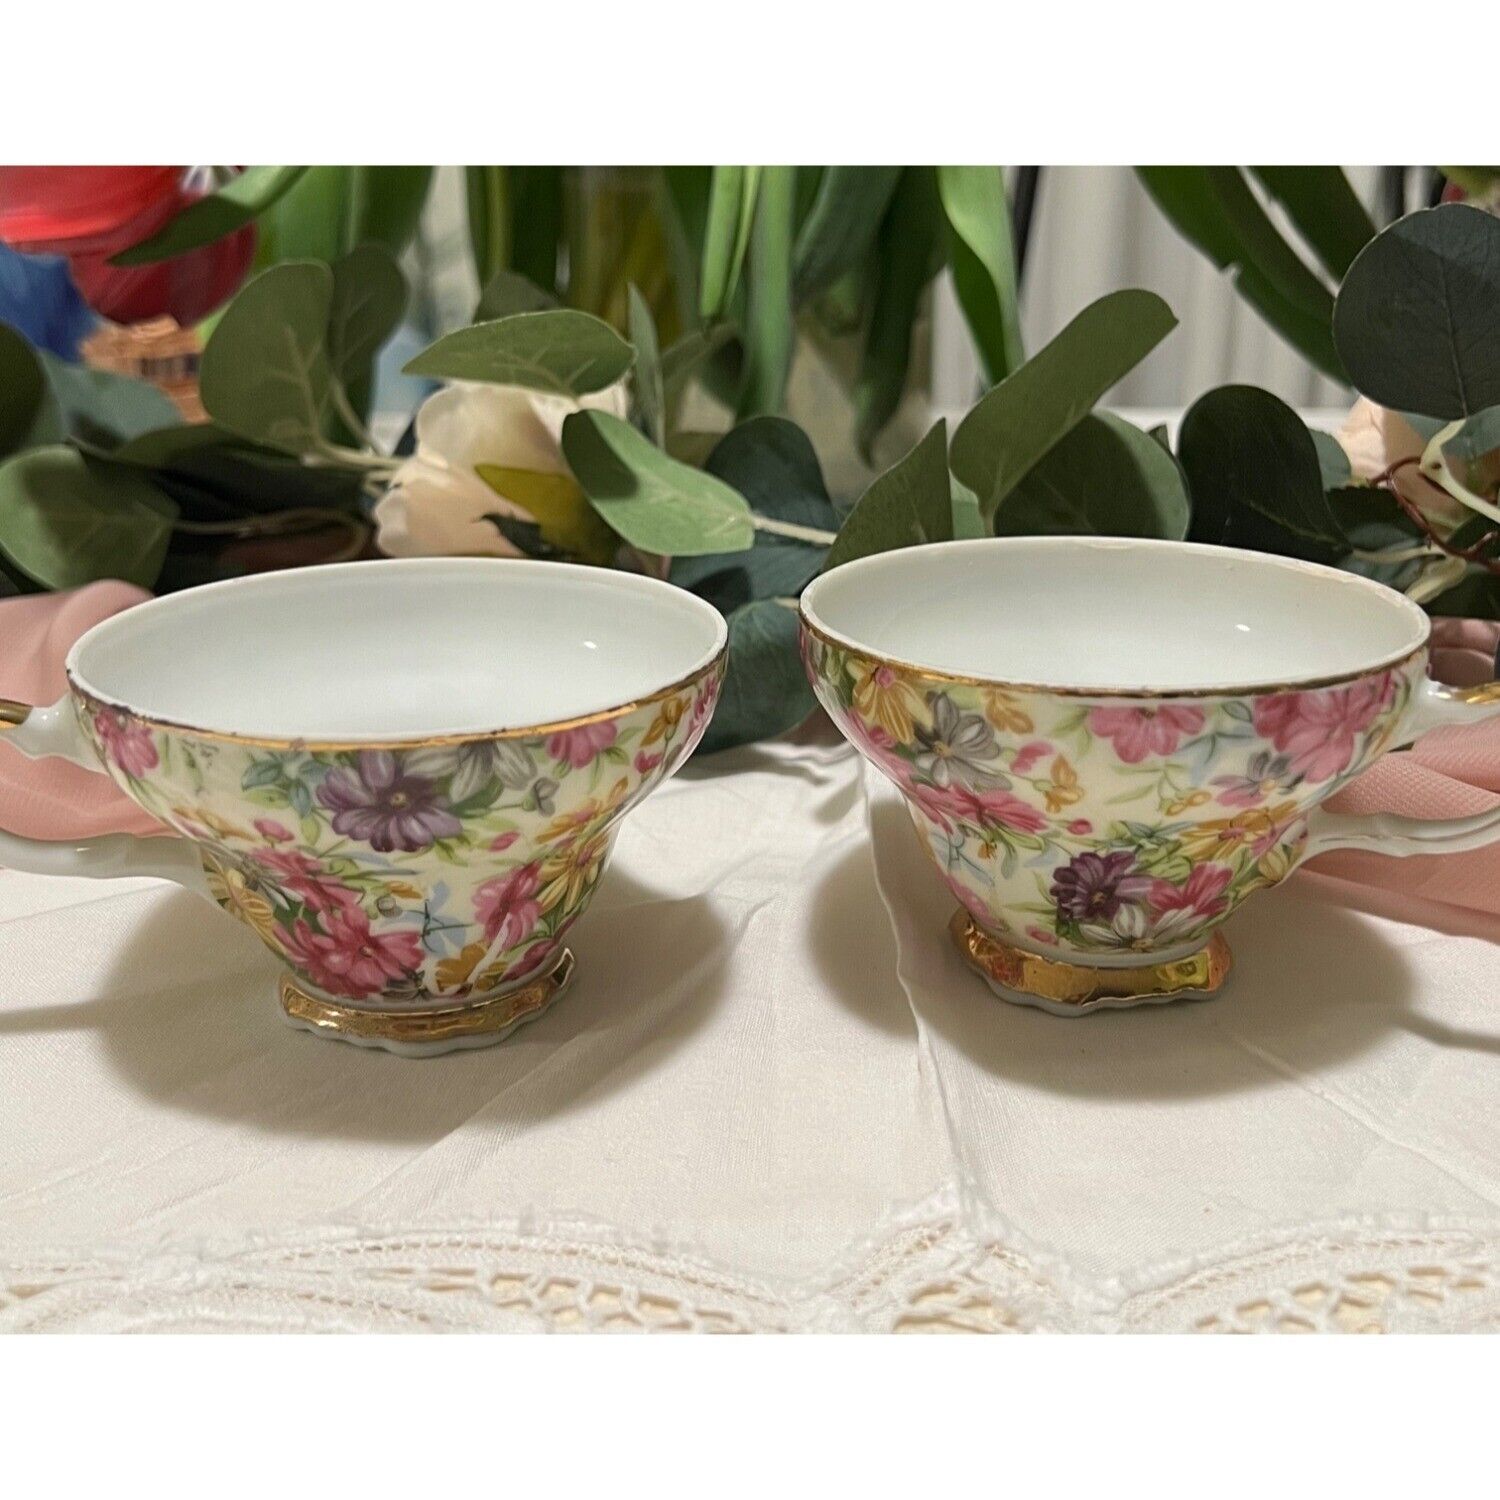 Two Vintage Victorian  Colorful MatchingFloral Tea cups